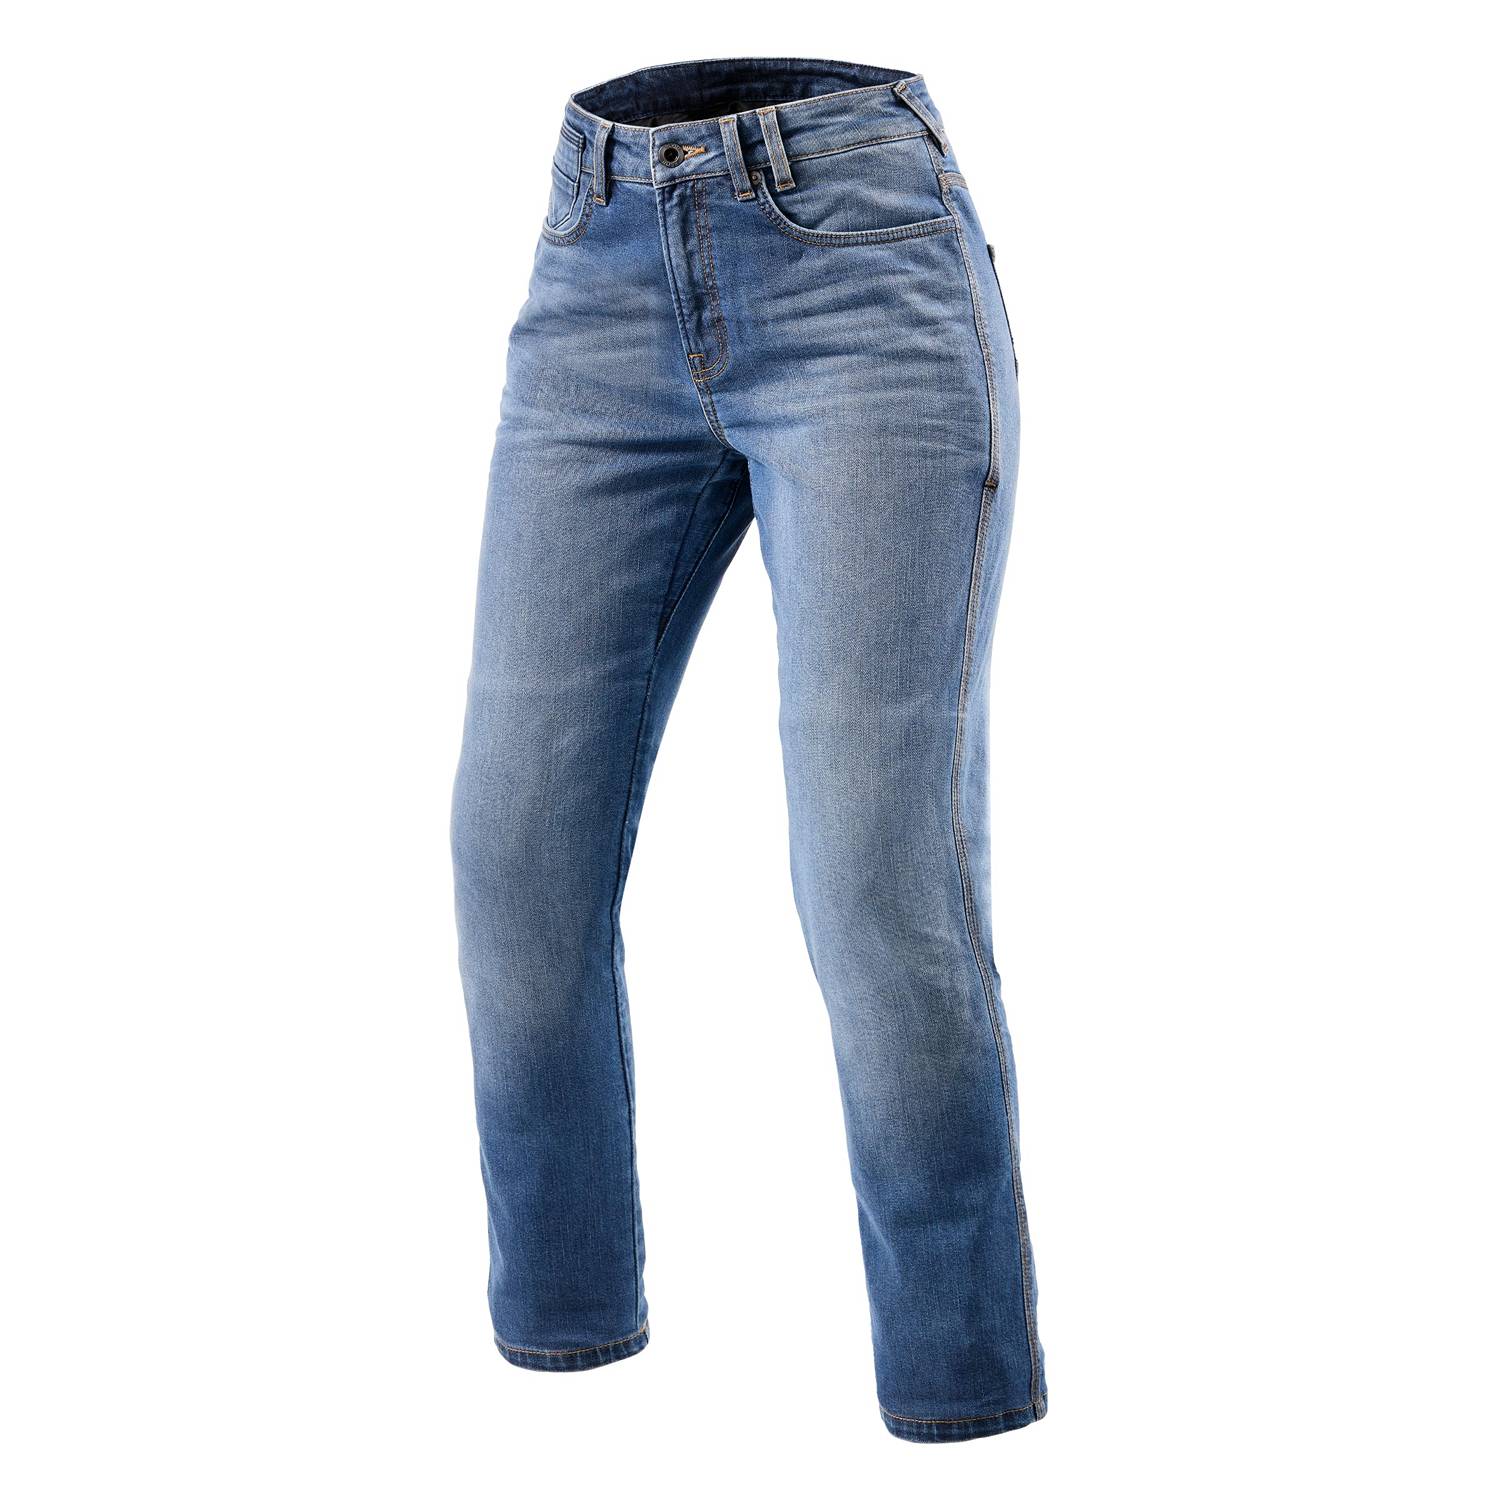 Image of EU REV'IT! Jeans Victoria 2 Ladies SF Classic Blue Used Motorcycle Jeans Taille L32/W24